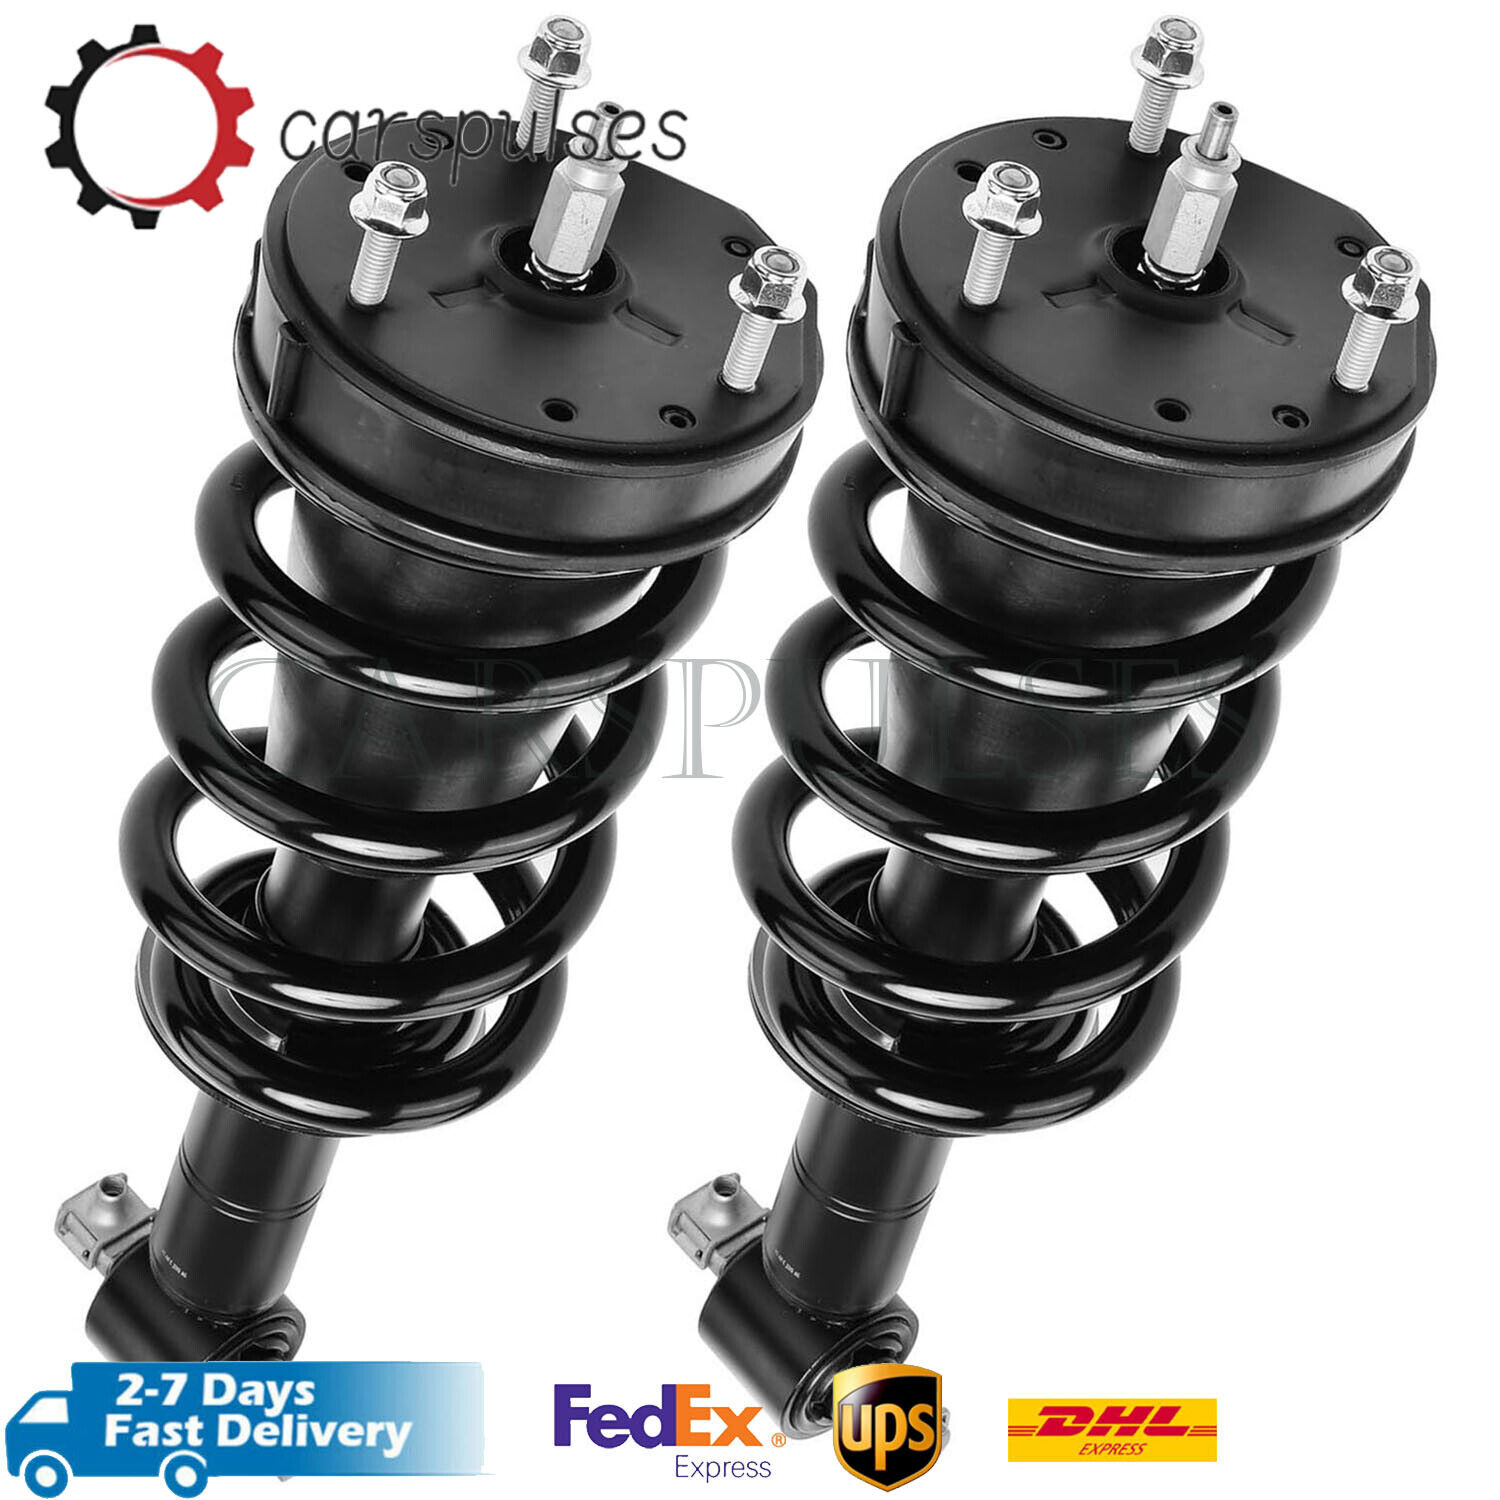 2X For 2007-2014 Cadillac Escalade GMC Yukon Front Magnetic Shock Strut Assembly